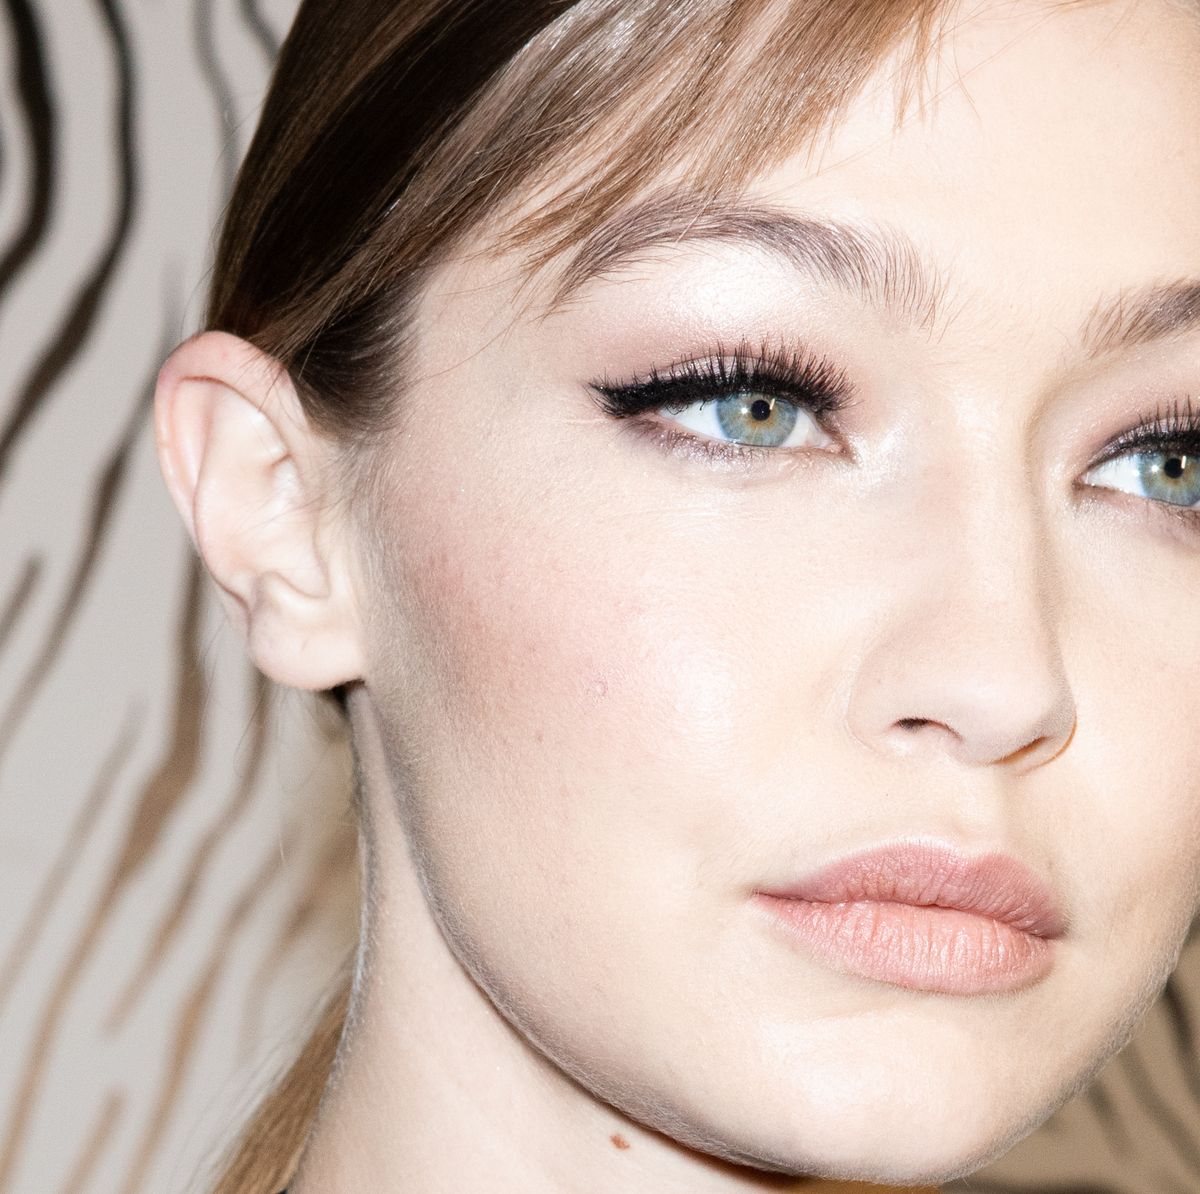 How To Use an Eyelash Curler the Right Way